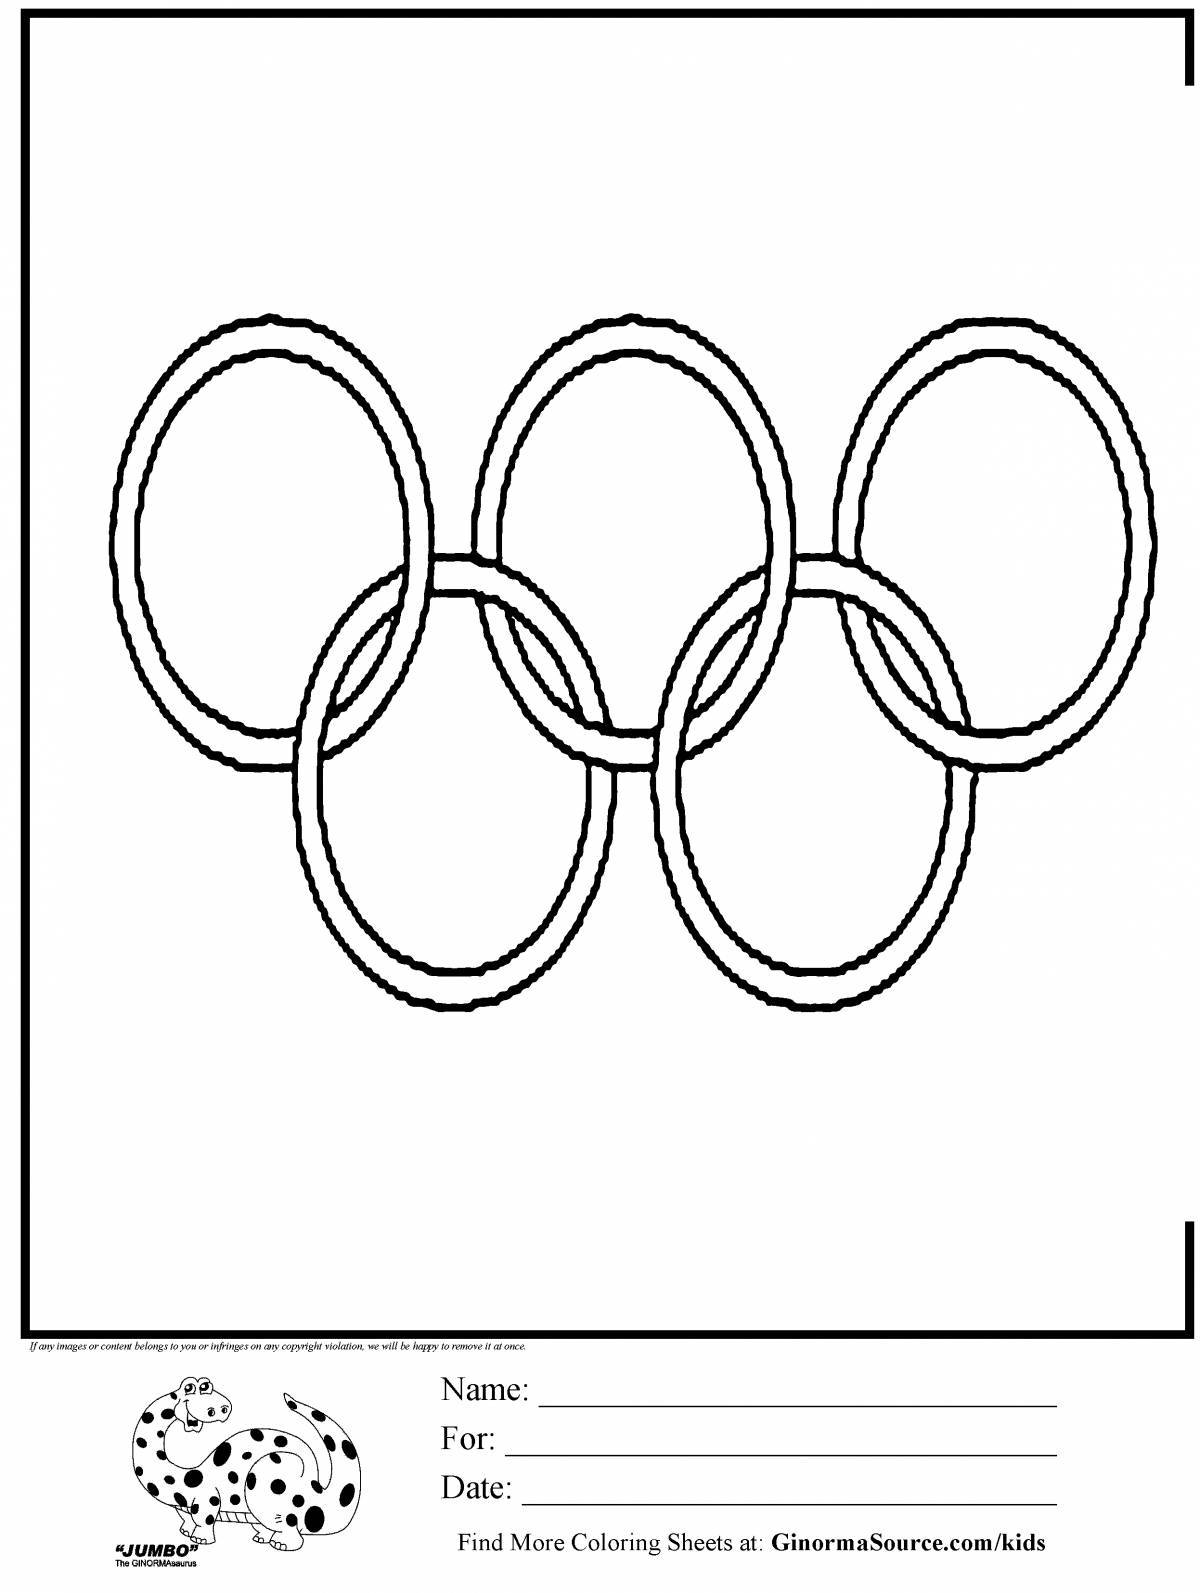 Coloring page dazzling olympic rings